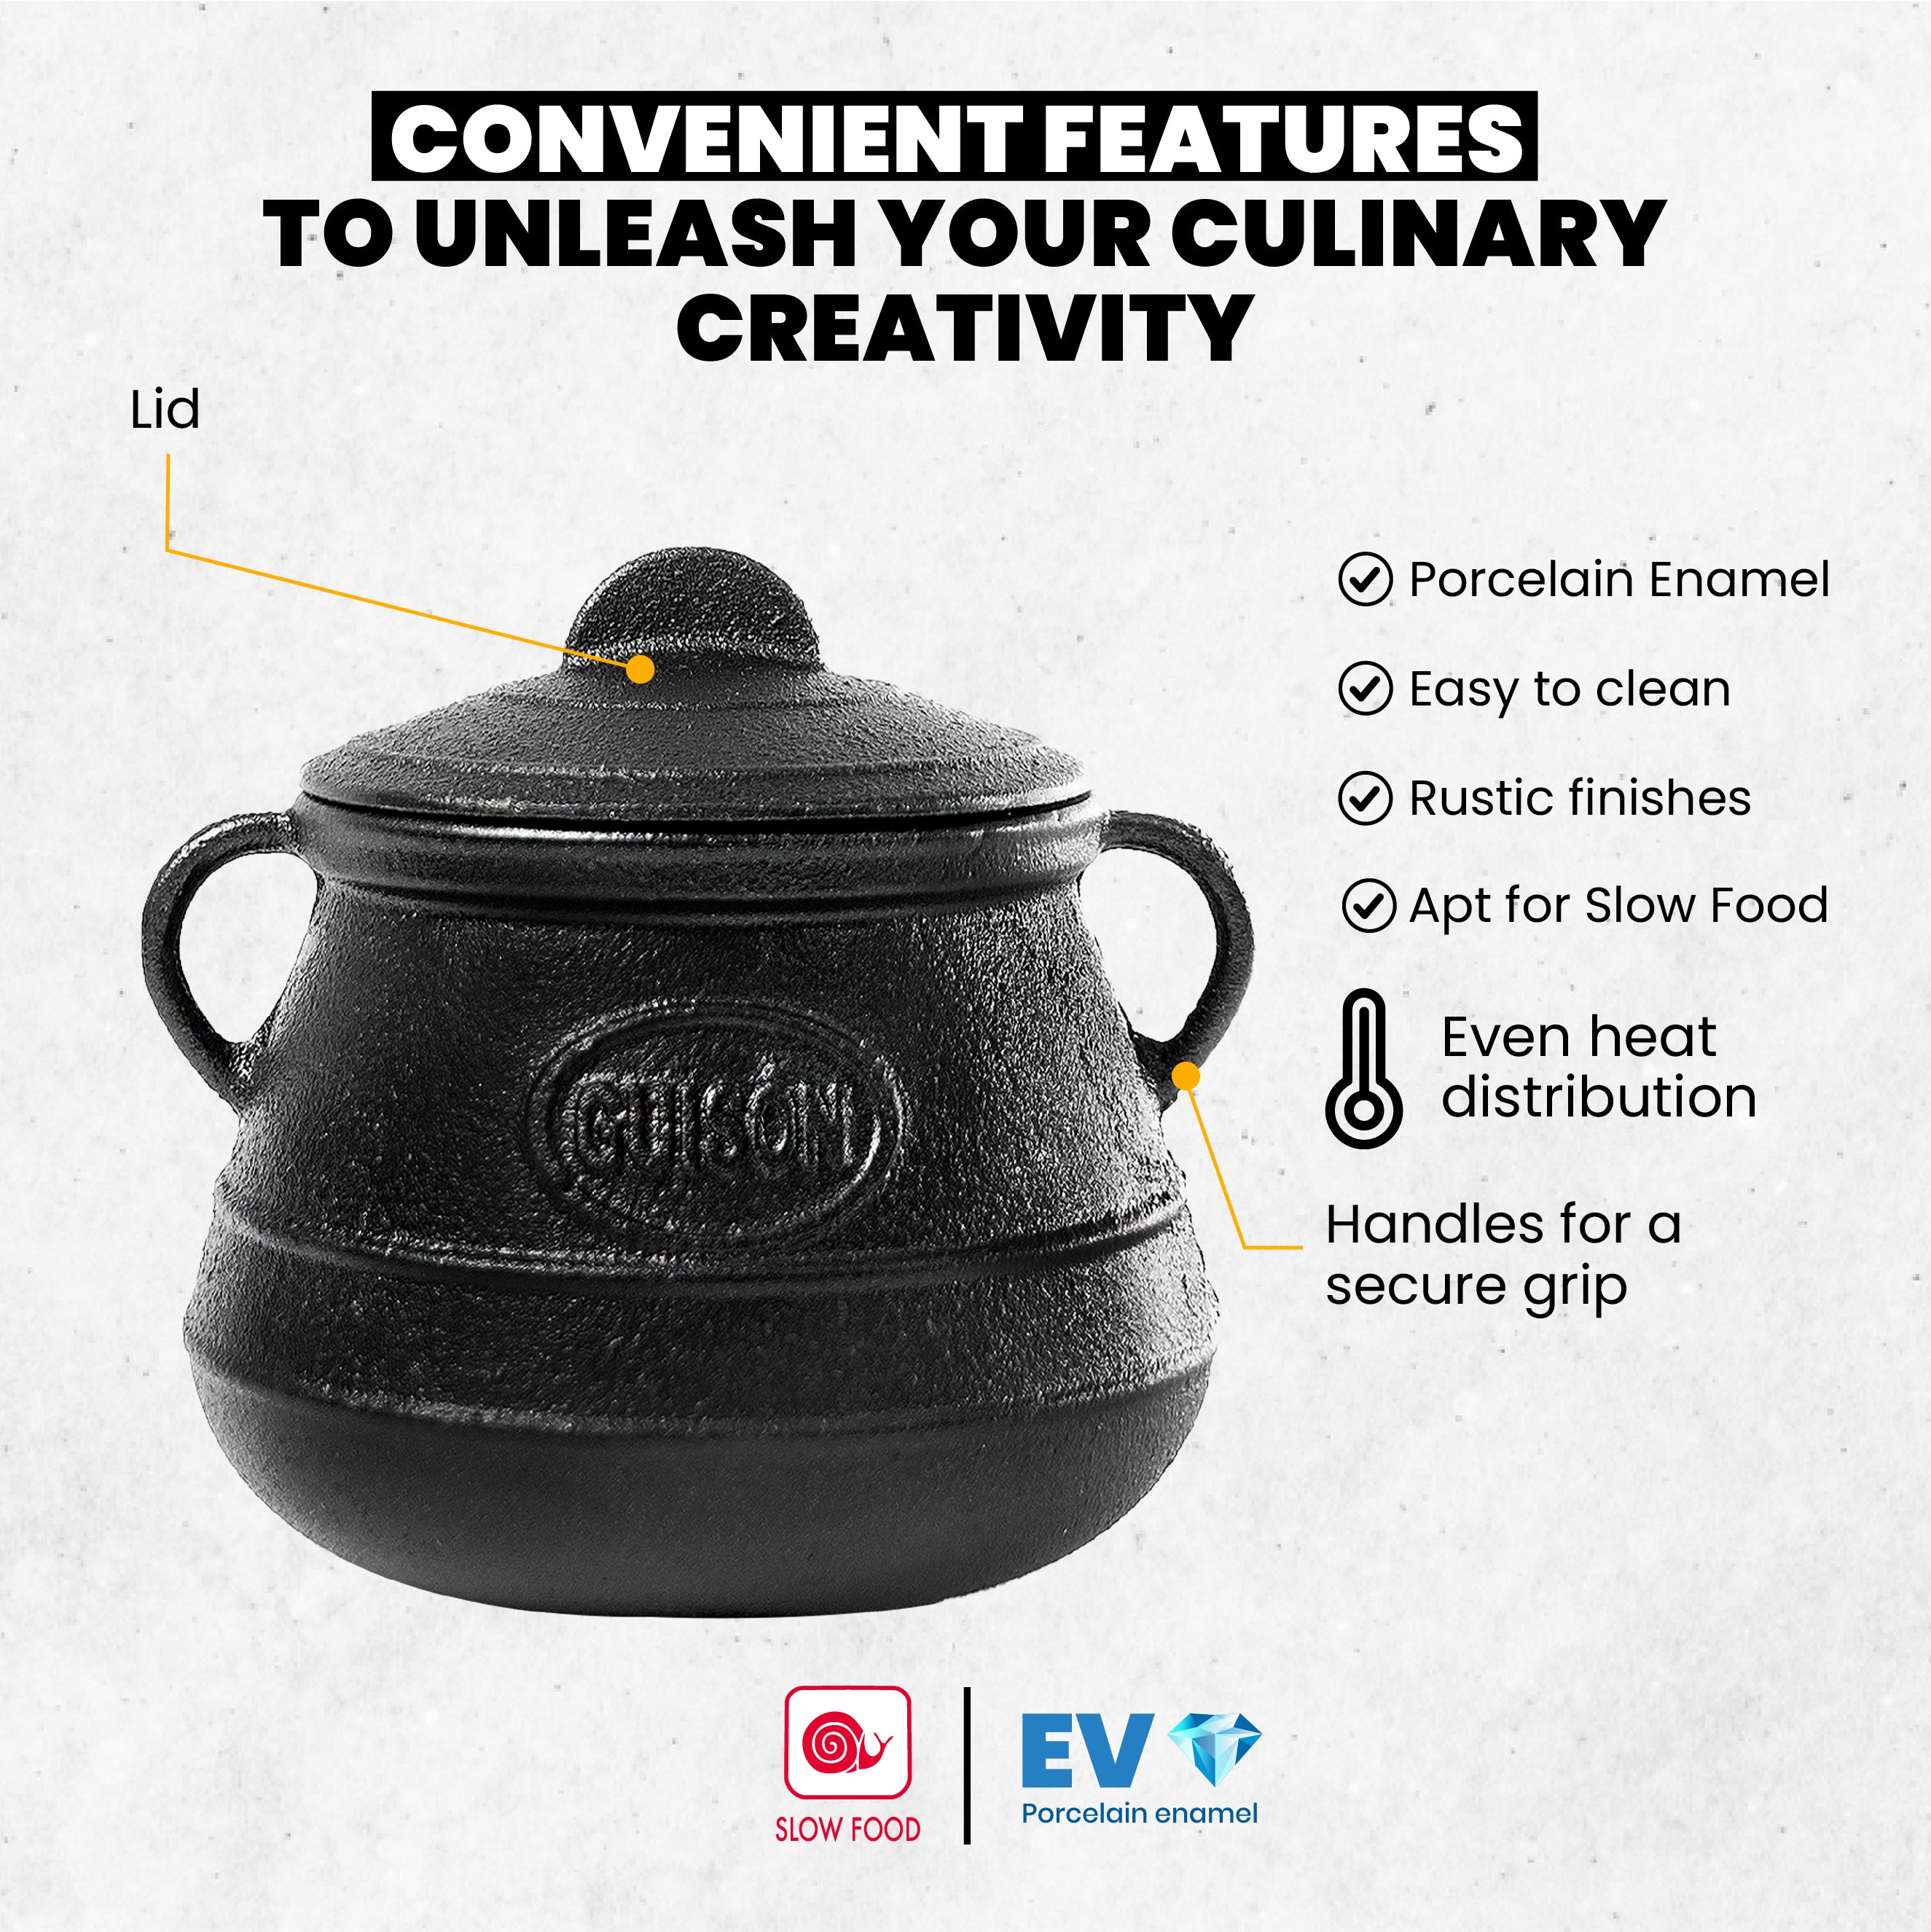 Cauldron Cast Iron | Enameled Coating Oven Pot With Lid| Durable Stock Pot for Dips, Sauces, Guacamole  & More | Perfect for Professional and Domestic Use | Single Serving | Mini |